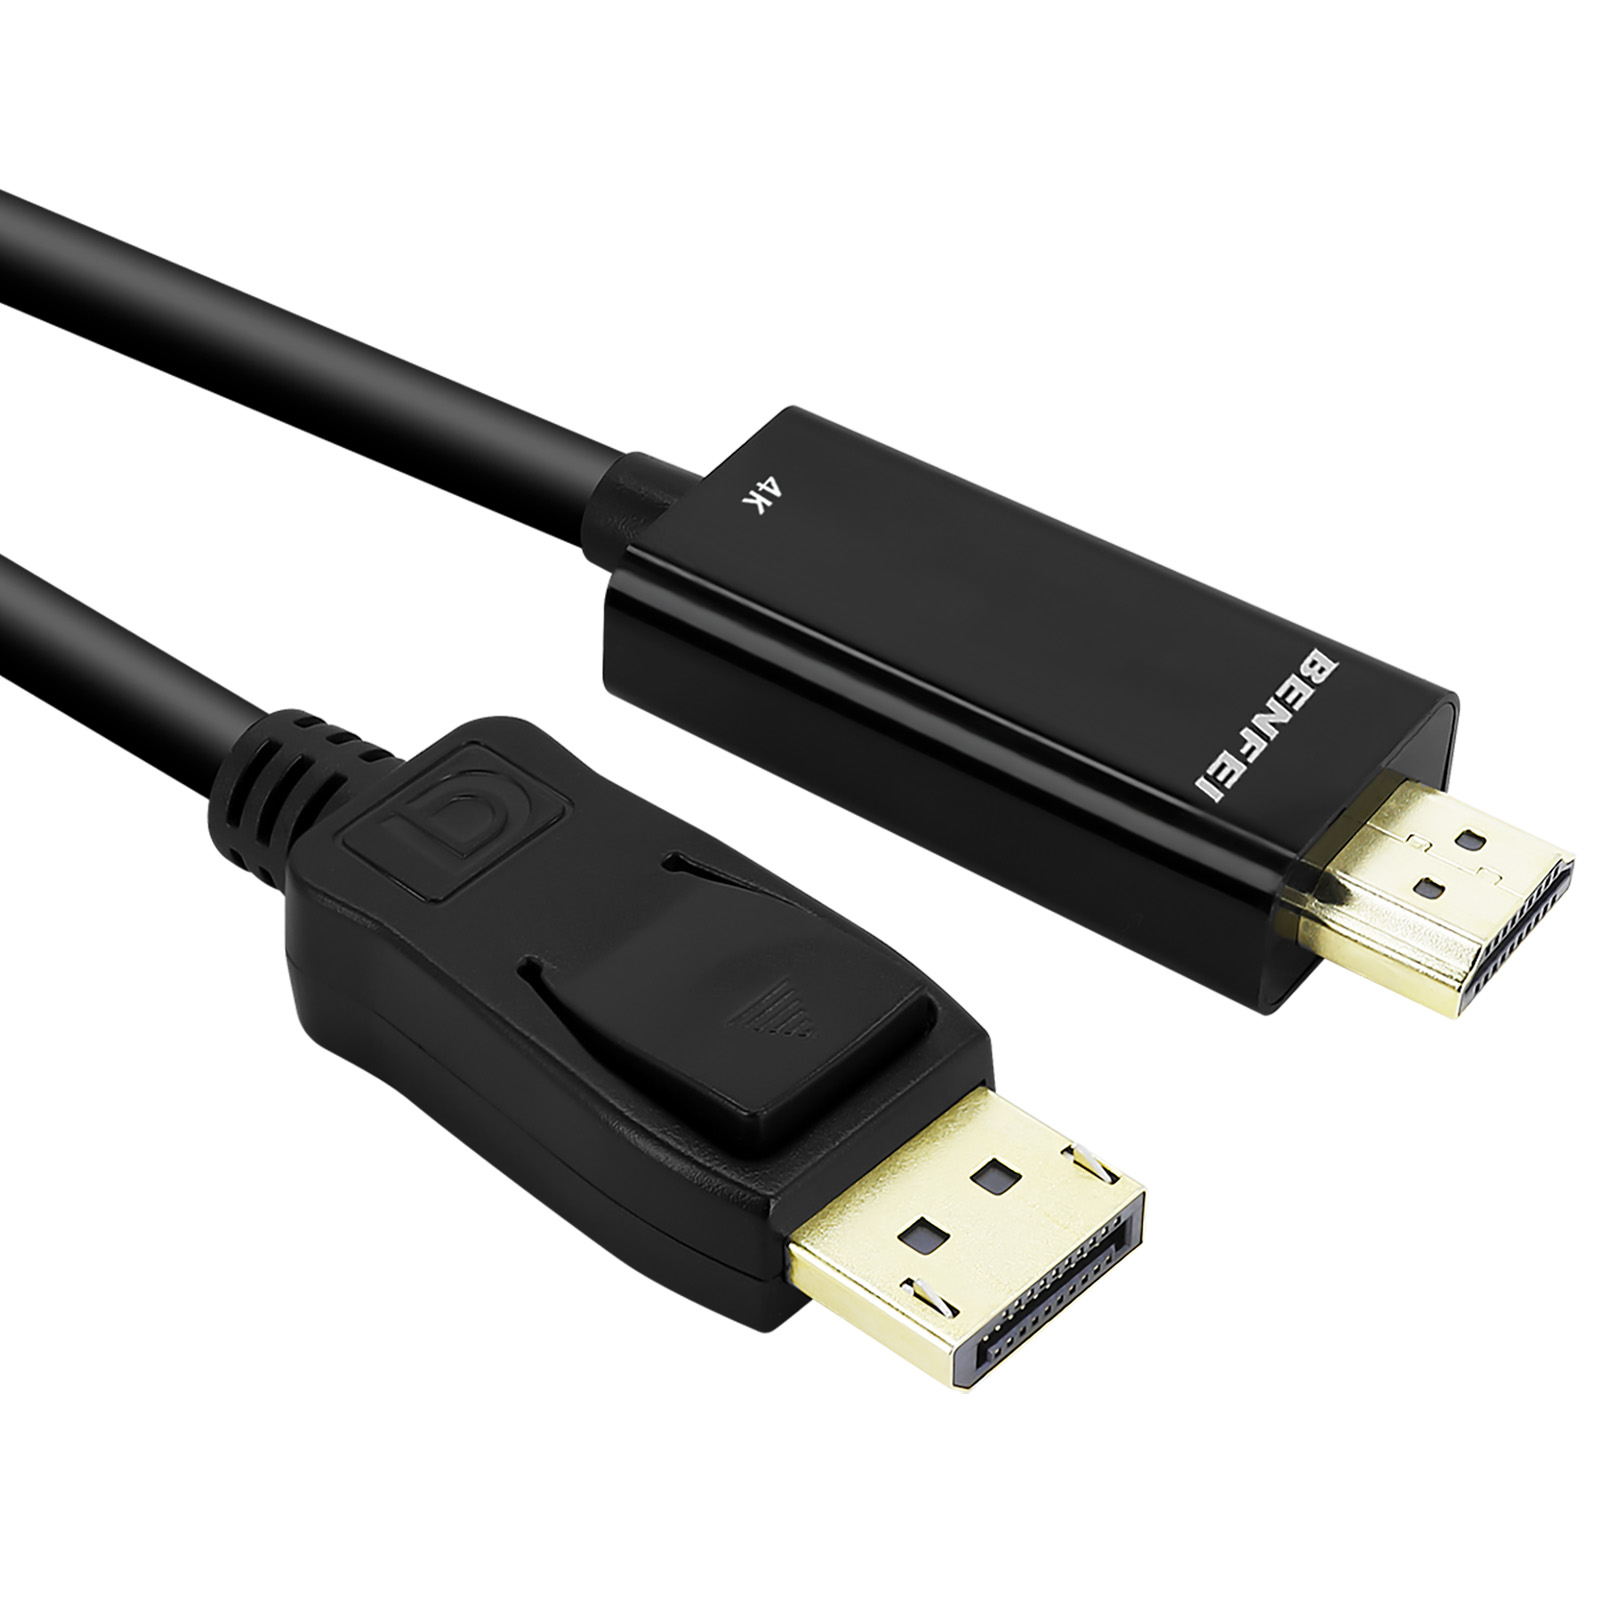 Buy BENFEI HDMI to VGA, Gold-Plated HDMI to VGA Adapter (Male to